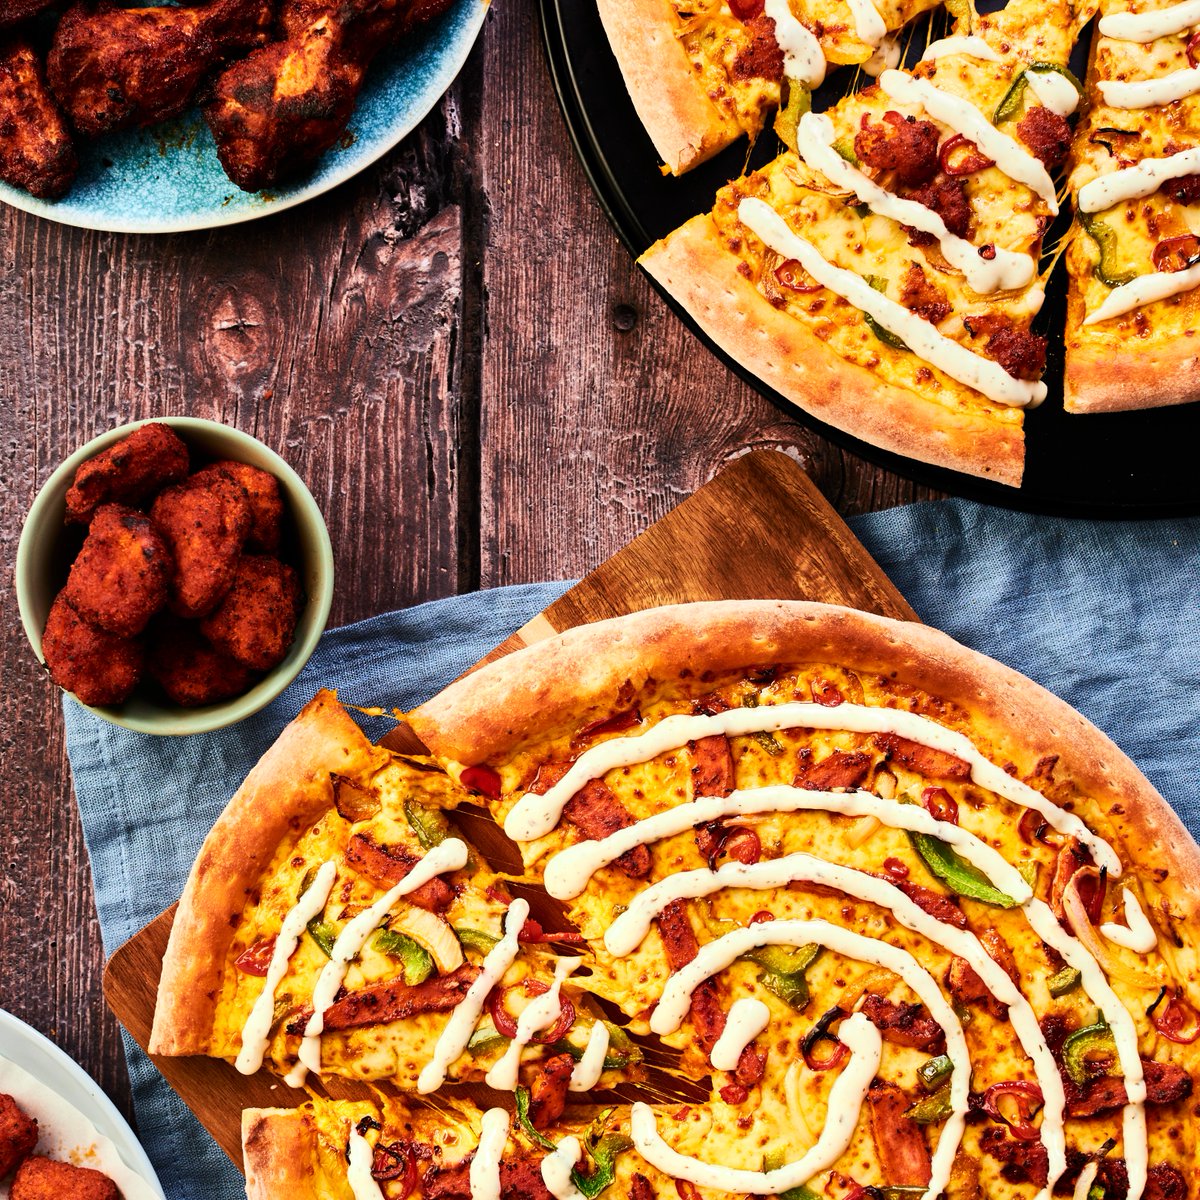 When pizza meets Indian takeaway 🤝 our Tandoori range does just that! Who's turning up the heat tonight? 🔥 #tandoorirange #newness #papajohnsuk